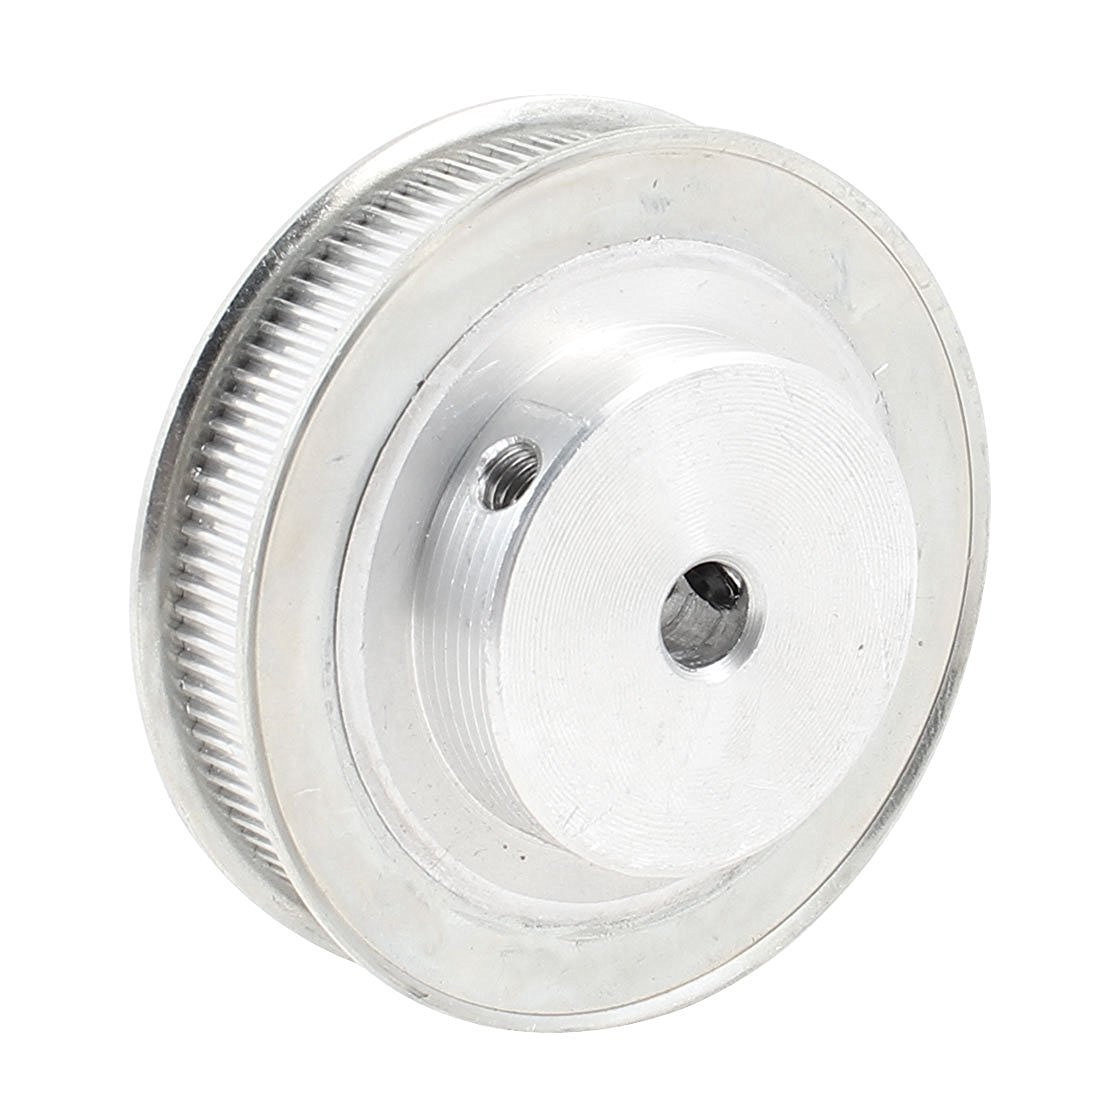 ǹ  ˷̴ ձ 100 ġ 8mm Ϸ  ũ Ÿ̹ Ǯ/Silver Tone Aluminum Alloy 100 Teeth 8mm Pilot Bore Screwed Timing Pulley